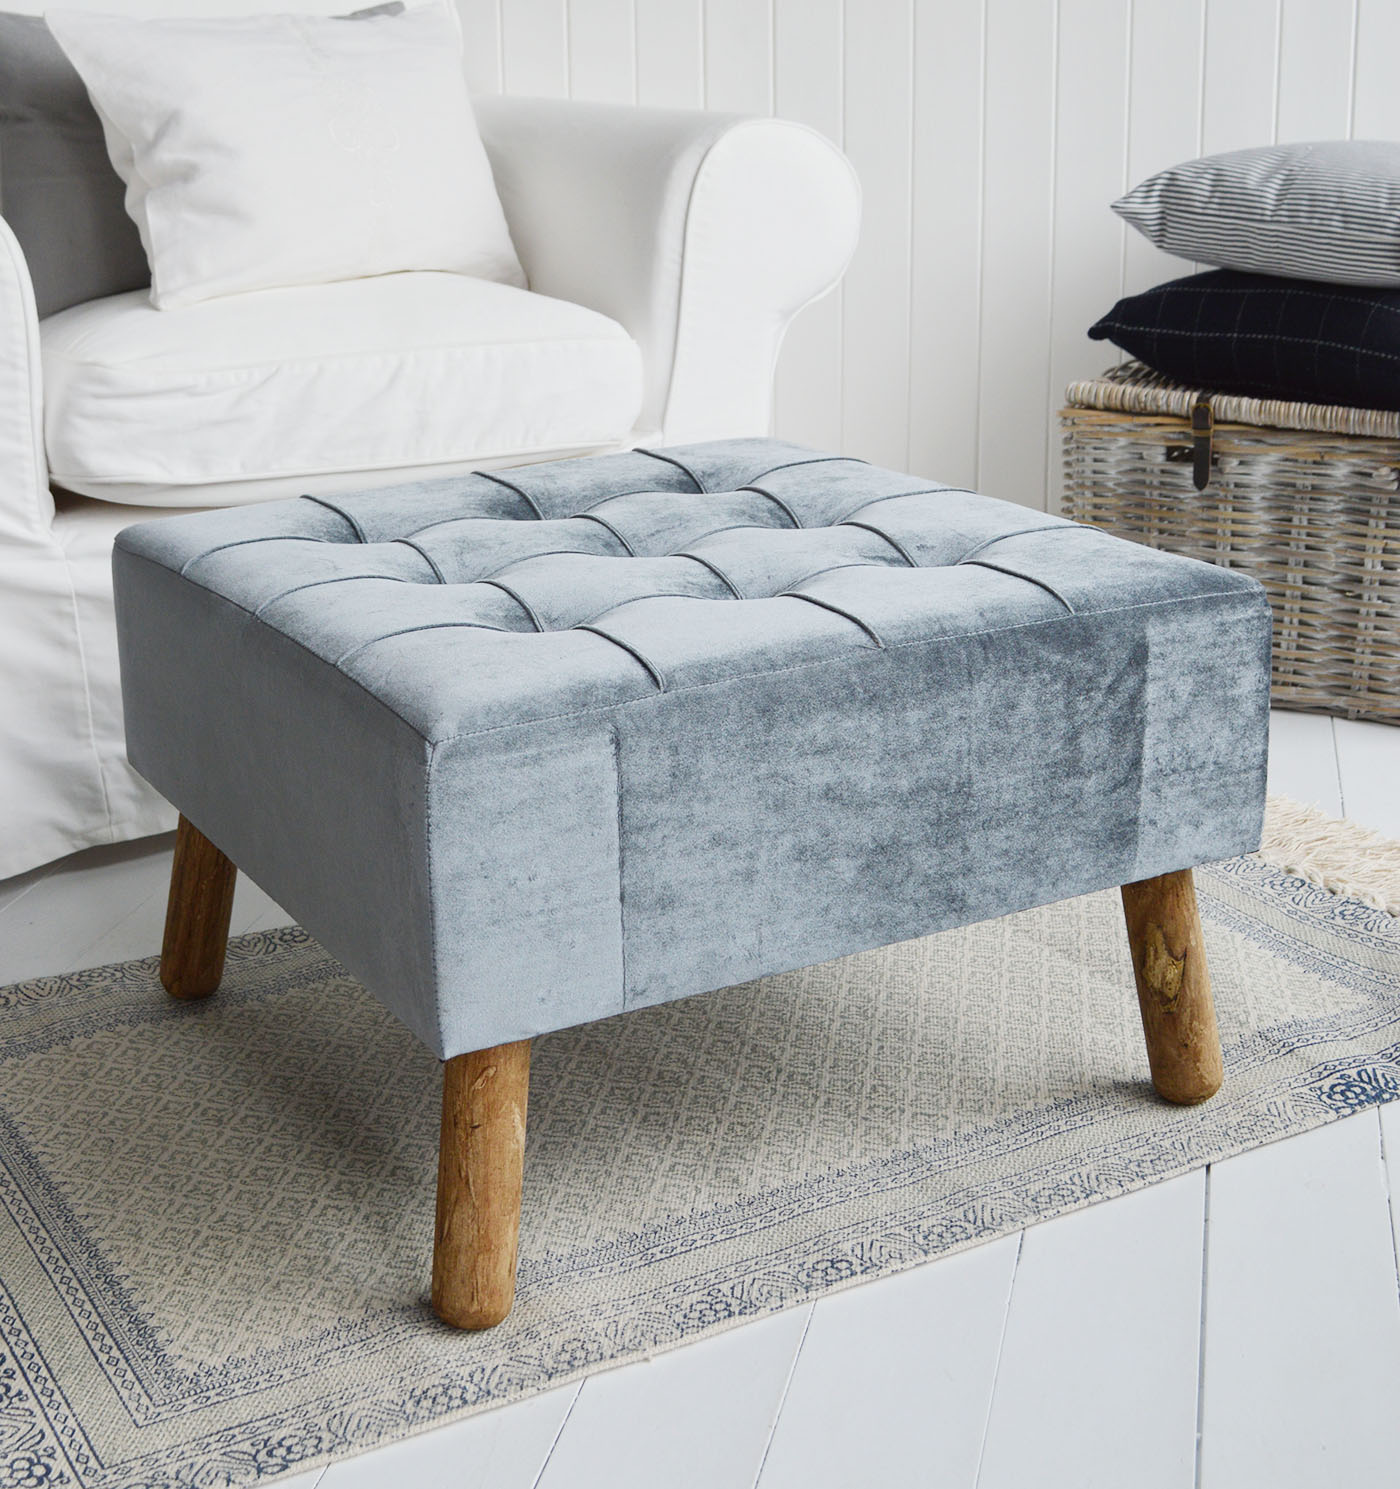 The New London footstool and ottoman in a buttoned luxurious blue grey velvet with aged oak coloured legs.A beautiful classic, timeless addition for all New England style homes in the country, by the coast and in the city.